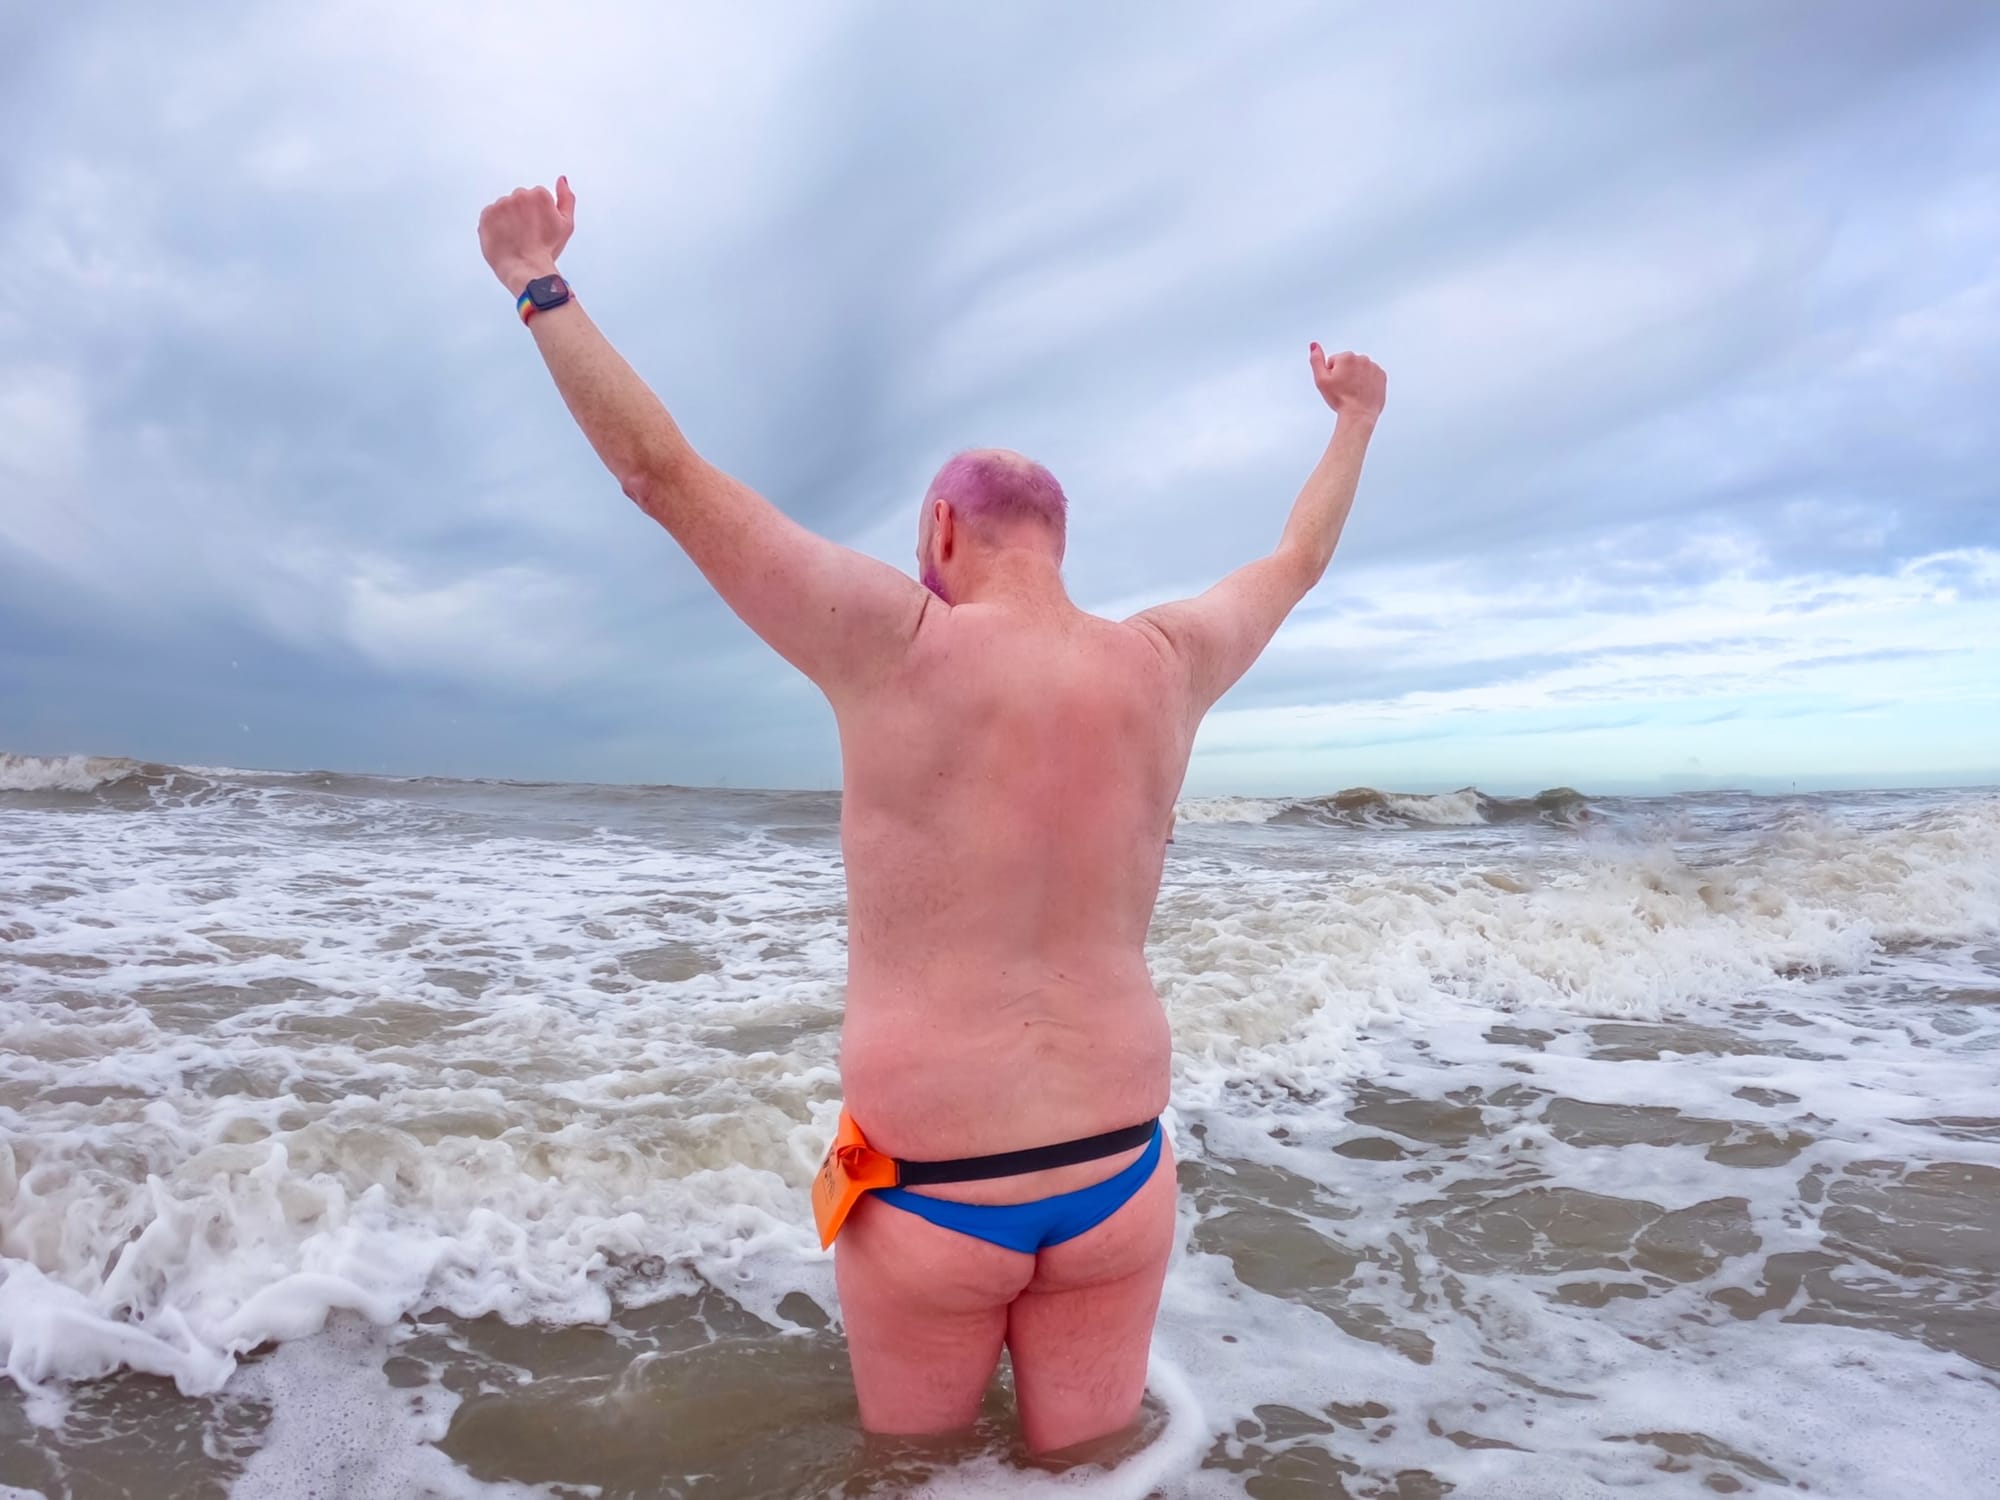 A male bodied non-binary person standing knee deep in the water. They have their back to the camera and are wearing only a blue thong.